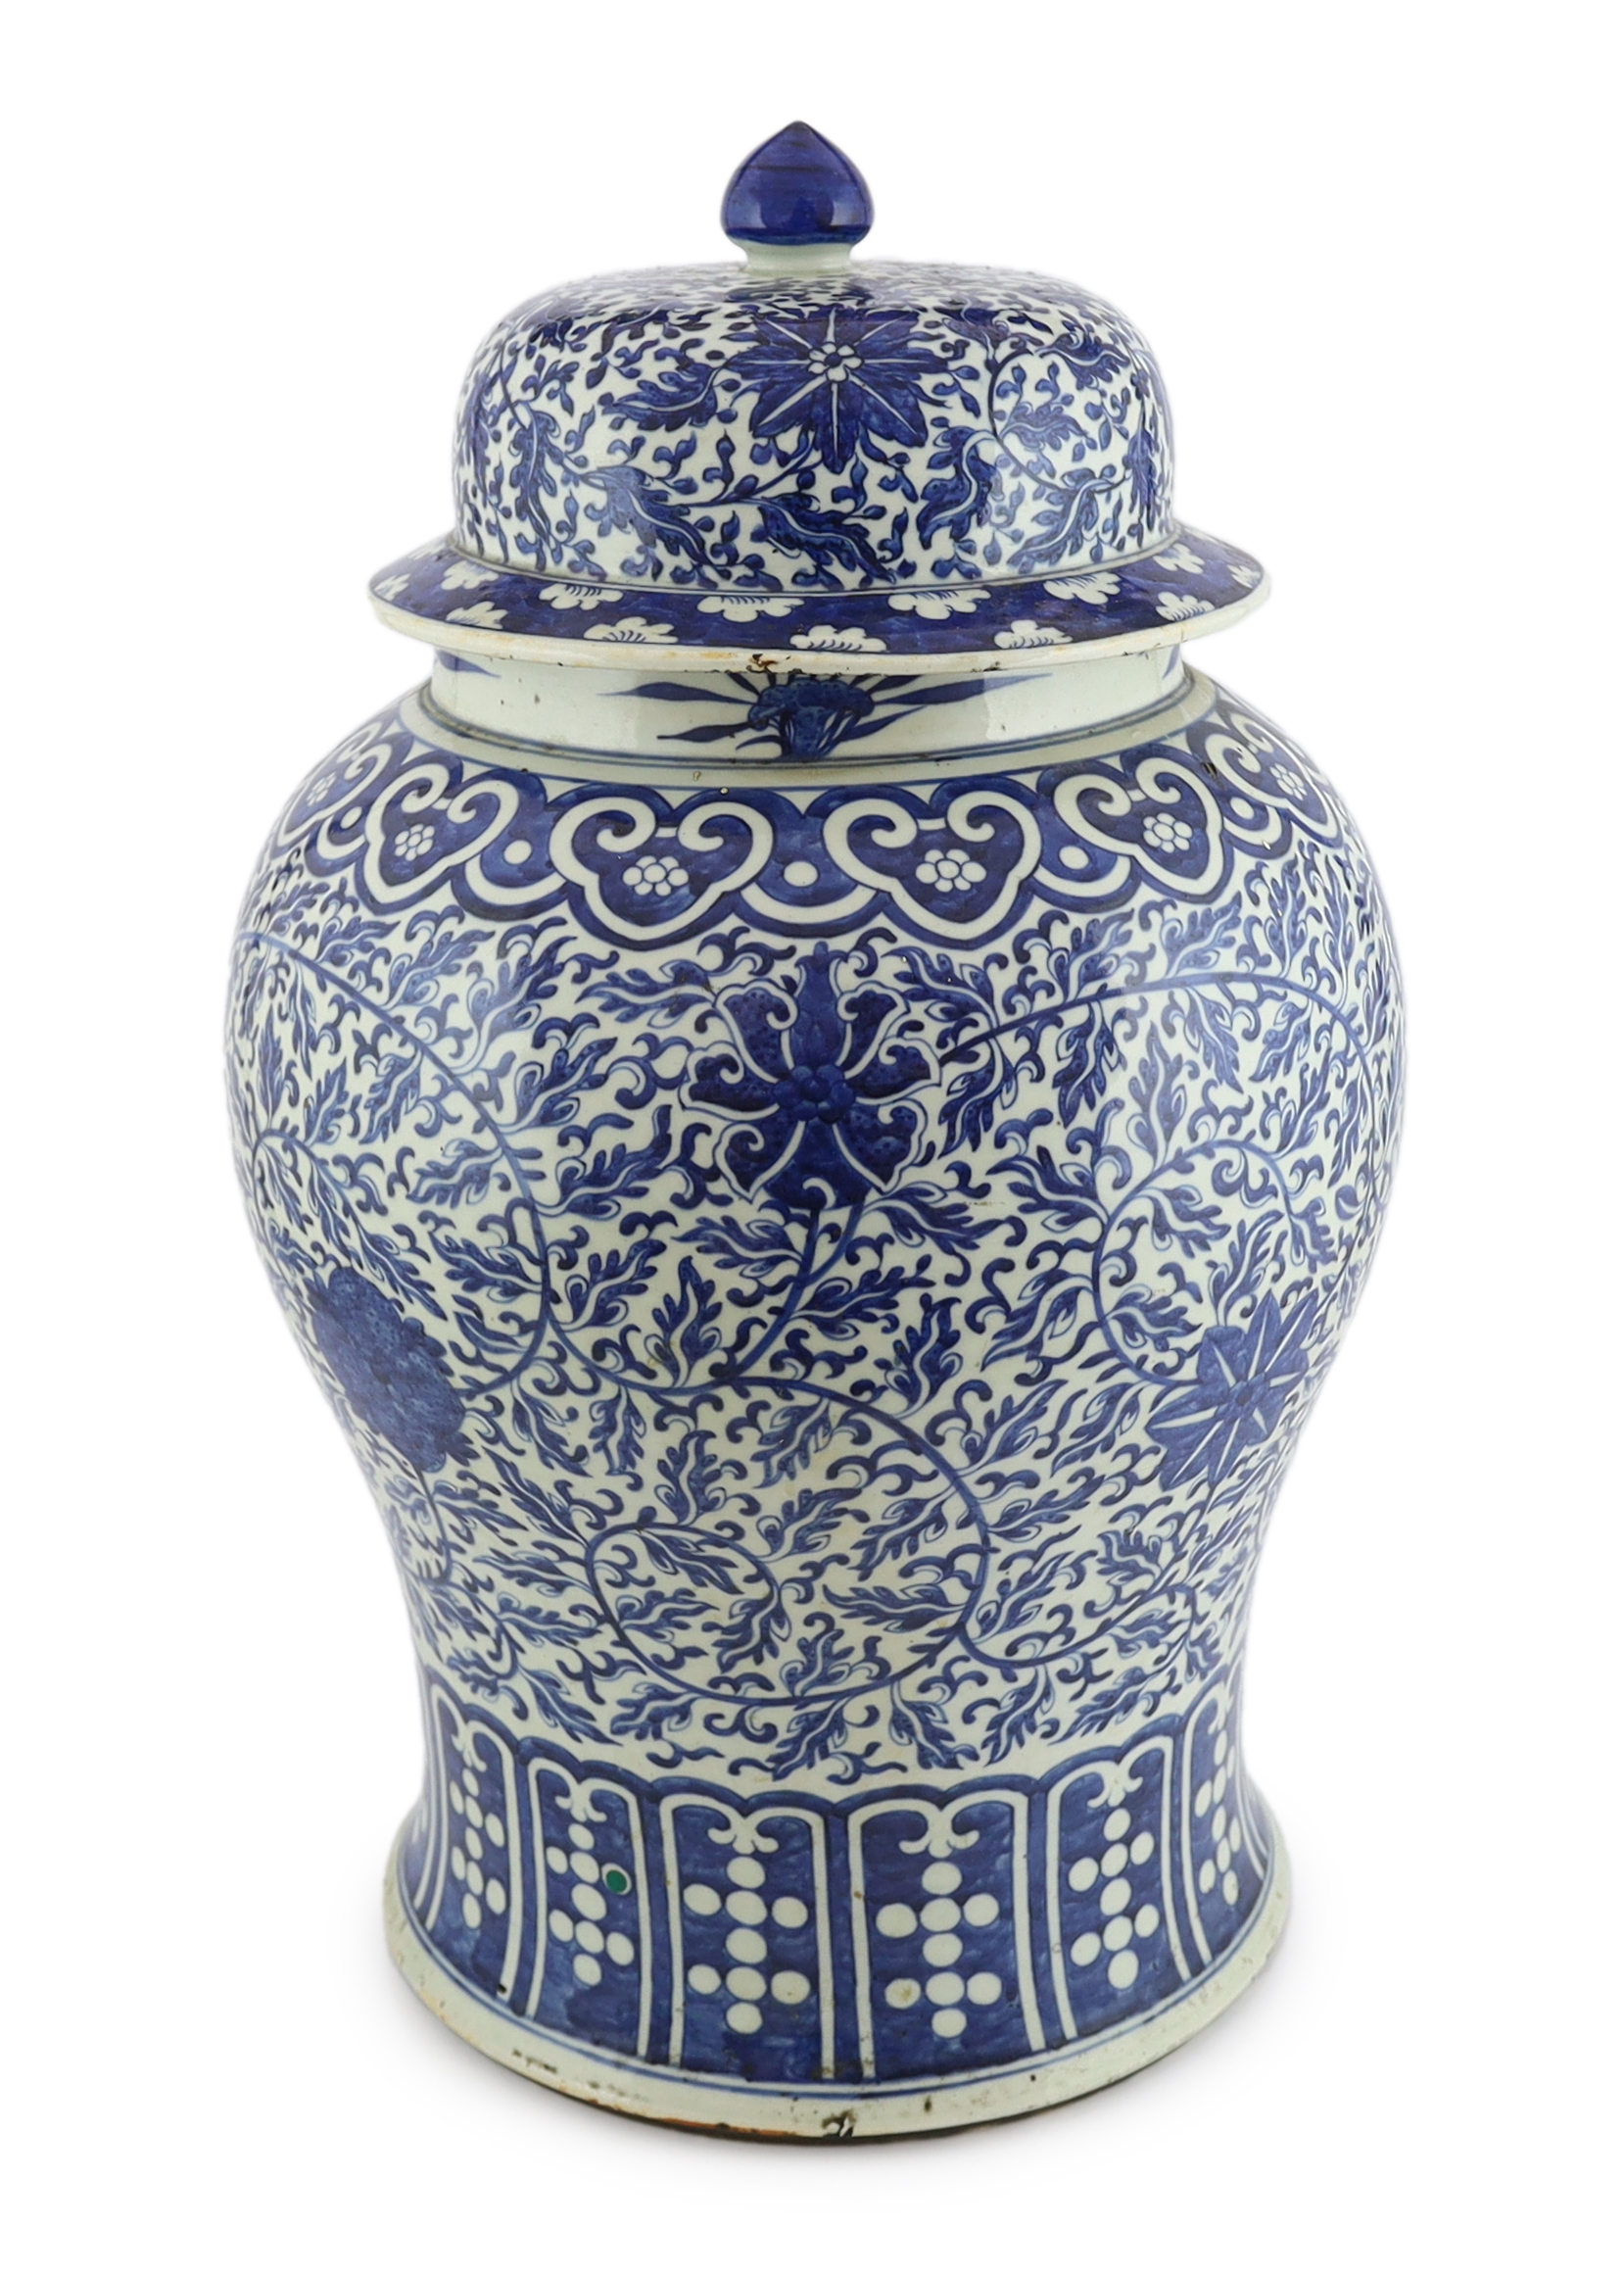 A massive Chinese blue and white ‘lotus’ vase and cover, 18th/19th century, broken and glued